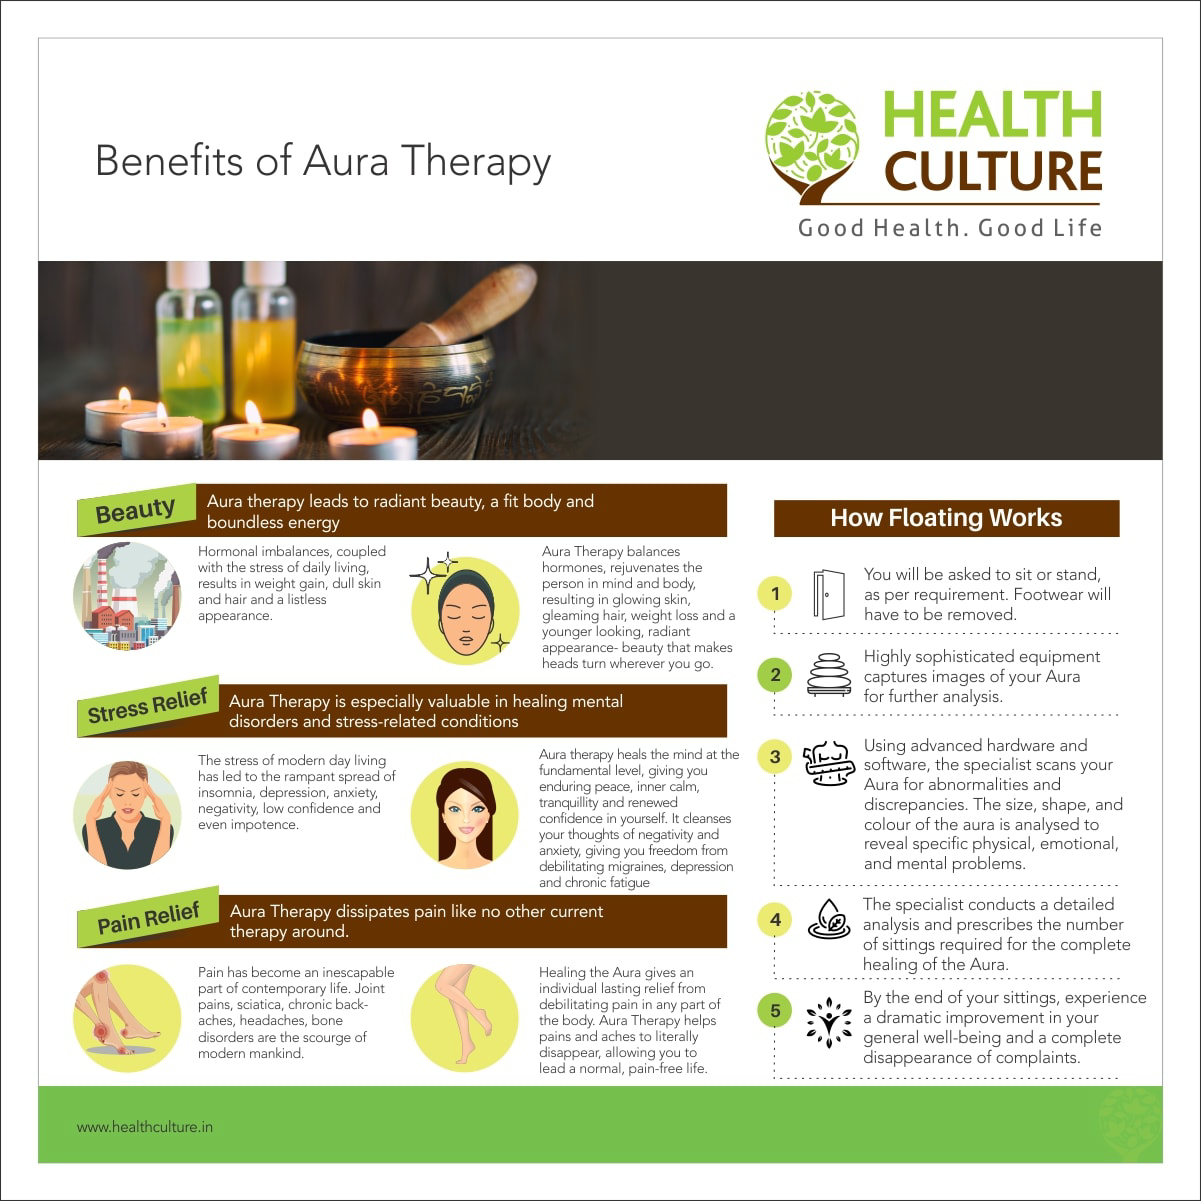 Benefits of Aura Therapy Article - Health Culture